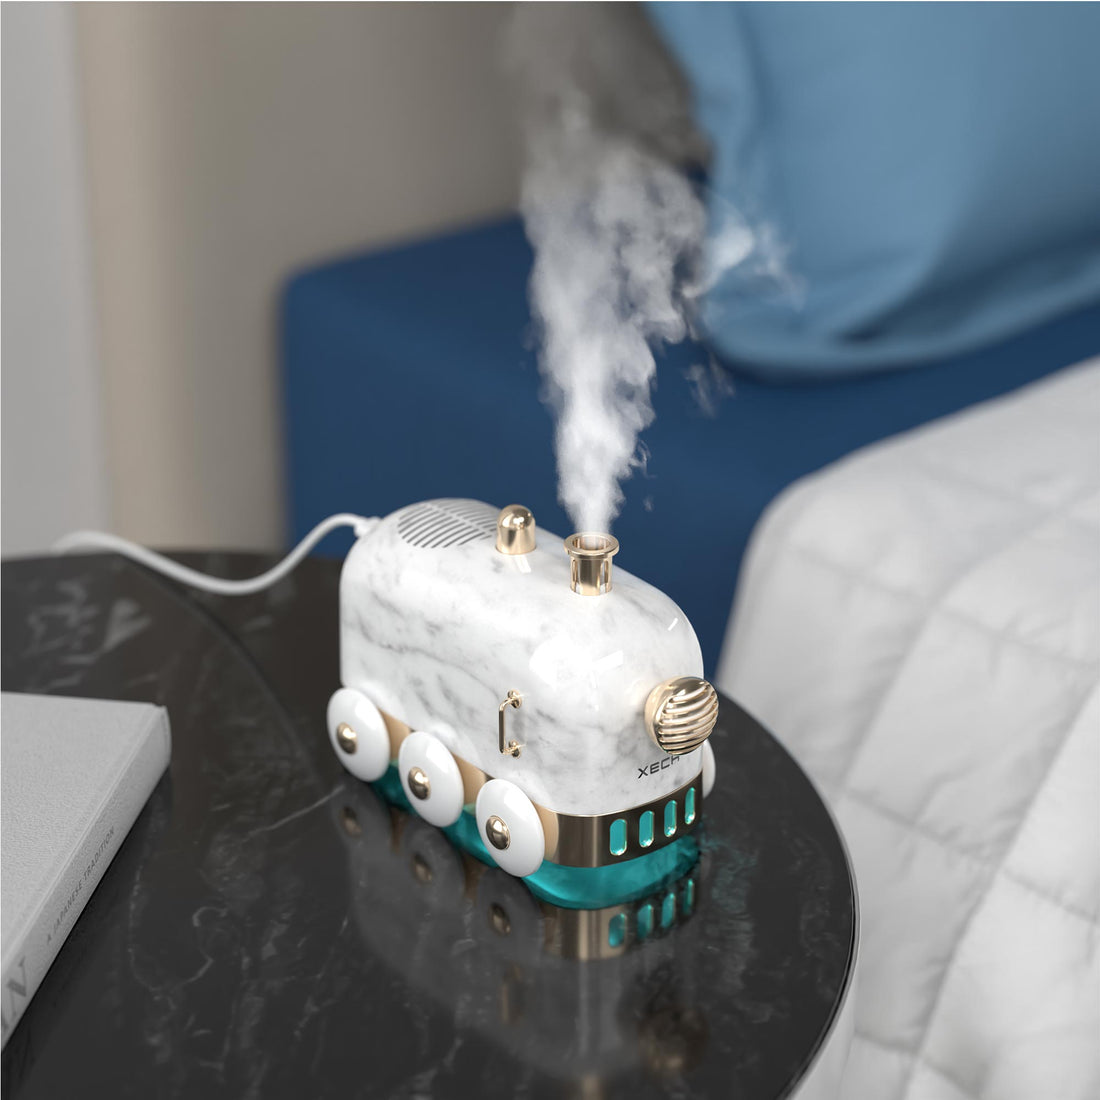 Personalized Humidifier cum Bluetooth Speaker - For Corporate Gifting, Office Gift Item, Return Gift, Event Gifts, Promotions